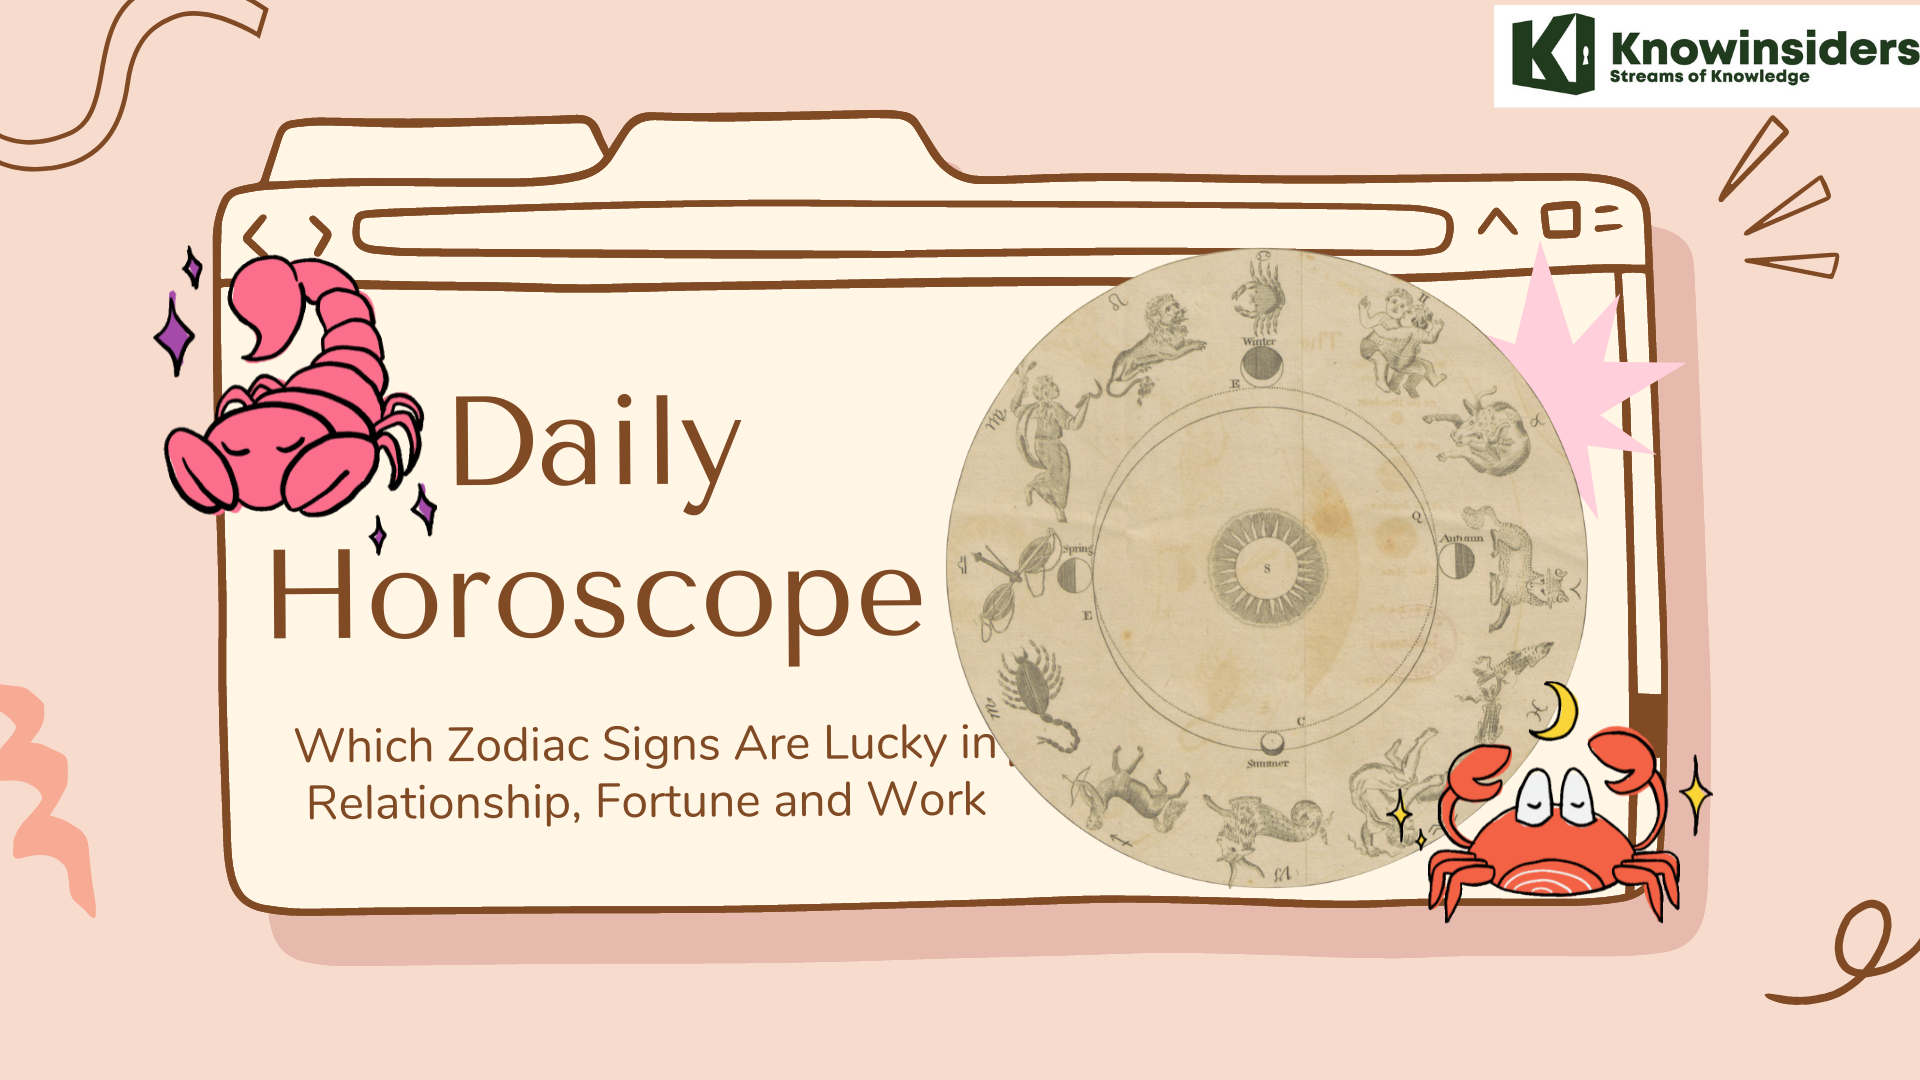 Daily Horoscope (June 15, 2022): Which Zodiac Signs Are Lucky in Relationship, Fortune and Work